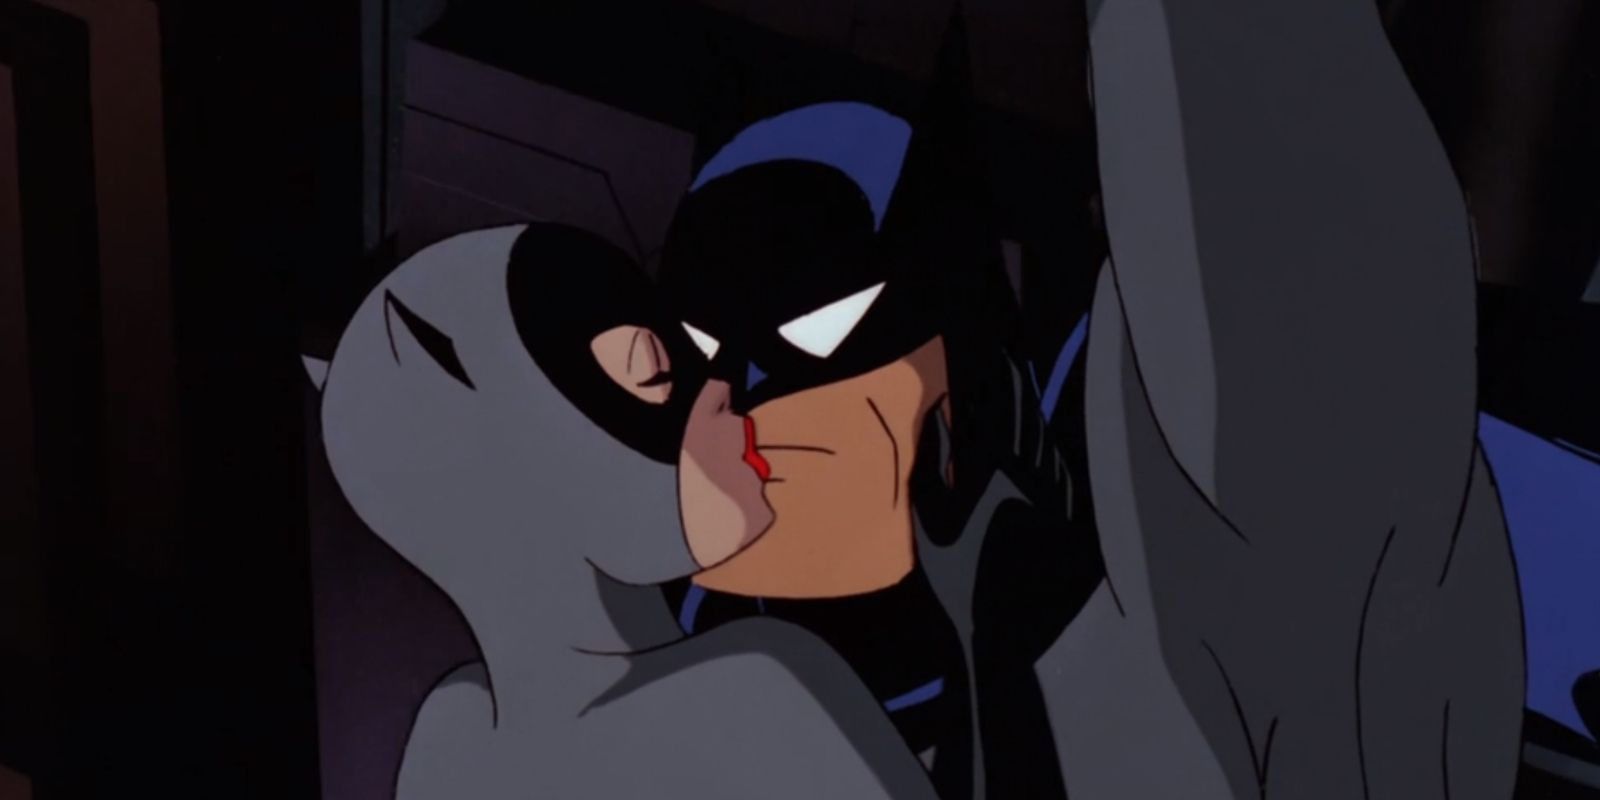 Catwoman kissing Batman as they swing across Gotham in Batman: The Animated Series